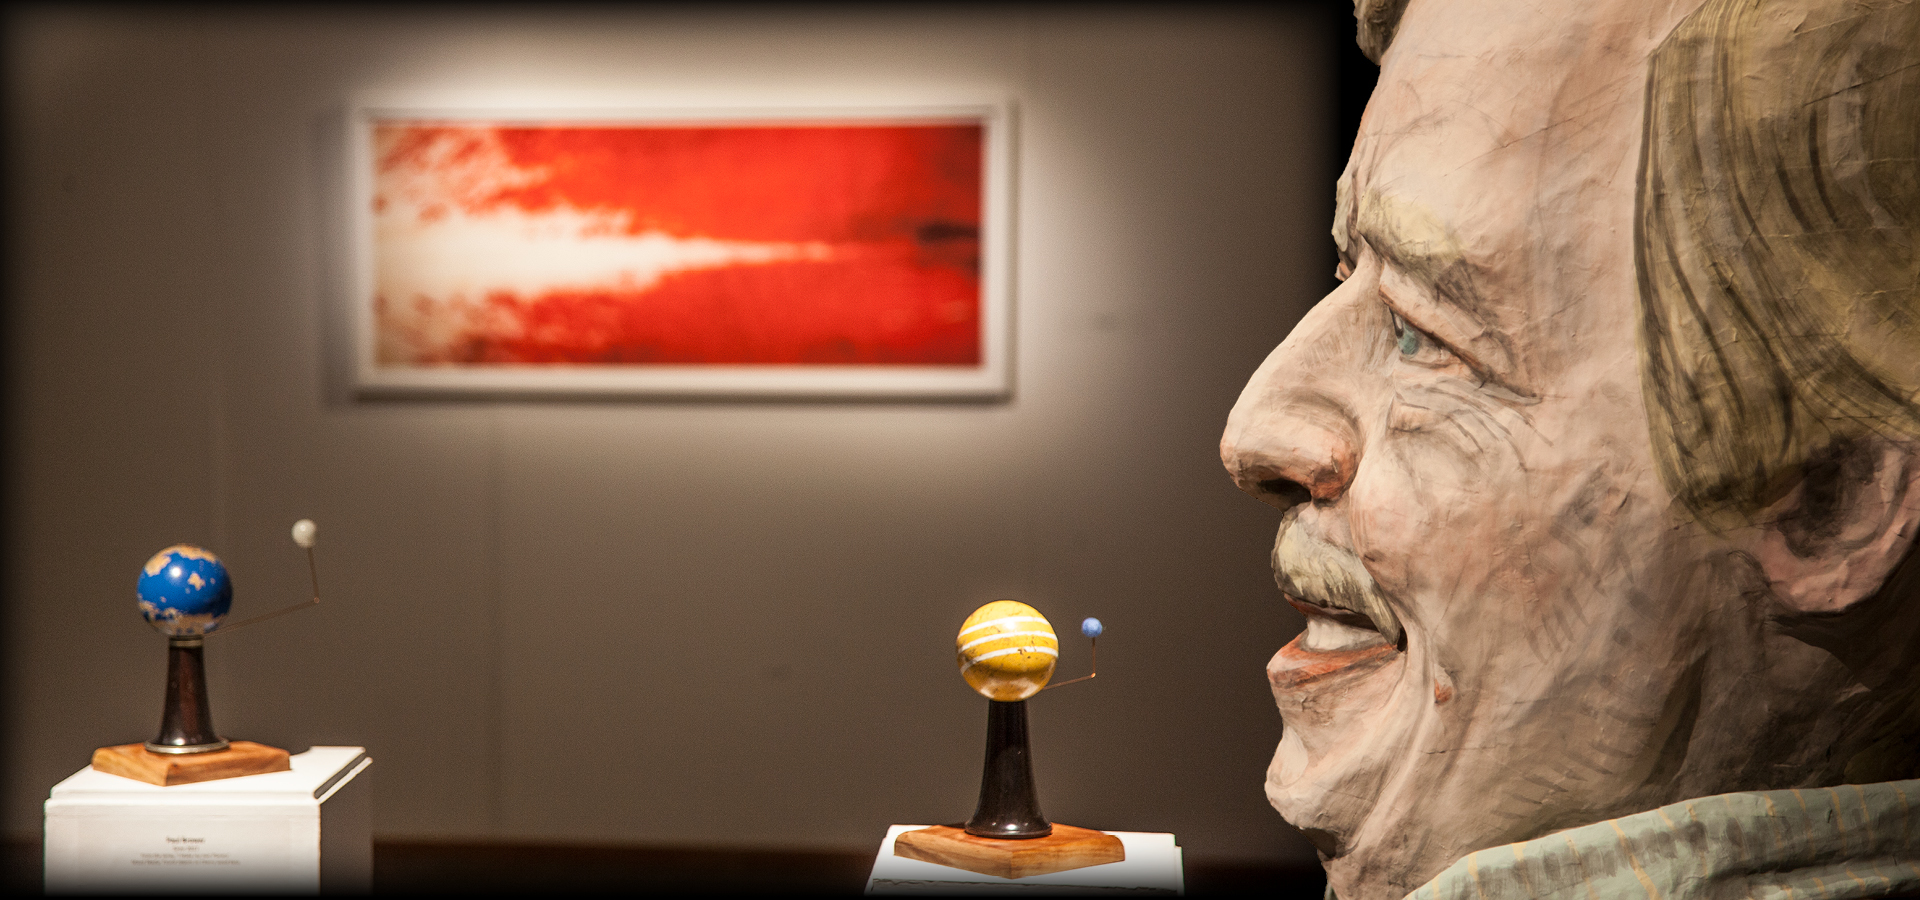 A larger-than-life sculpture of a head in front and to the side of an abstract, blurred painting hung on a gallery wall. In front of the painting two small sculptures stand on pedestals, acting as diagrams of moons orbiting around planets 